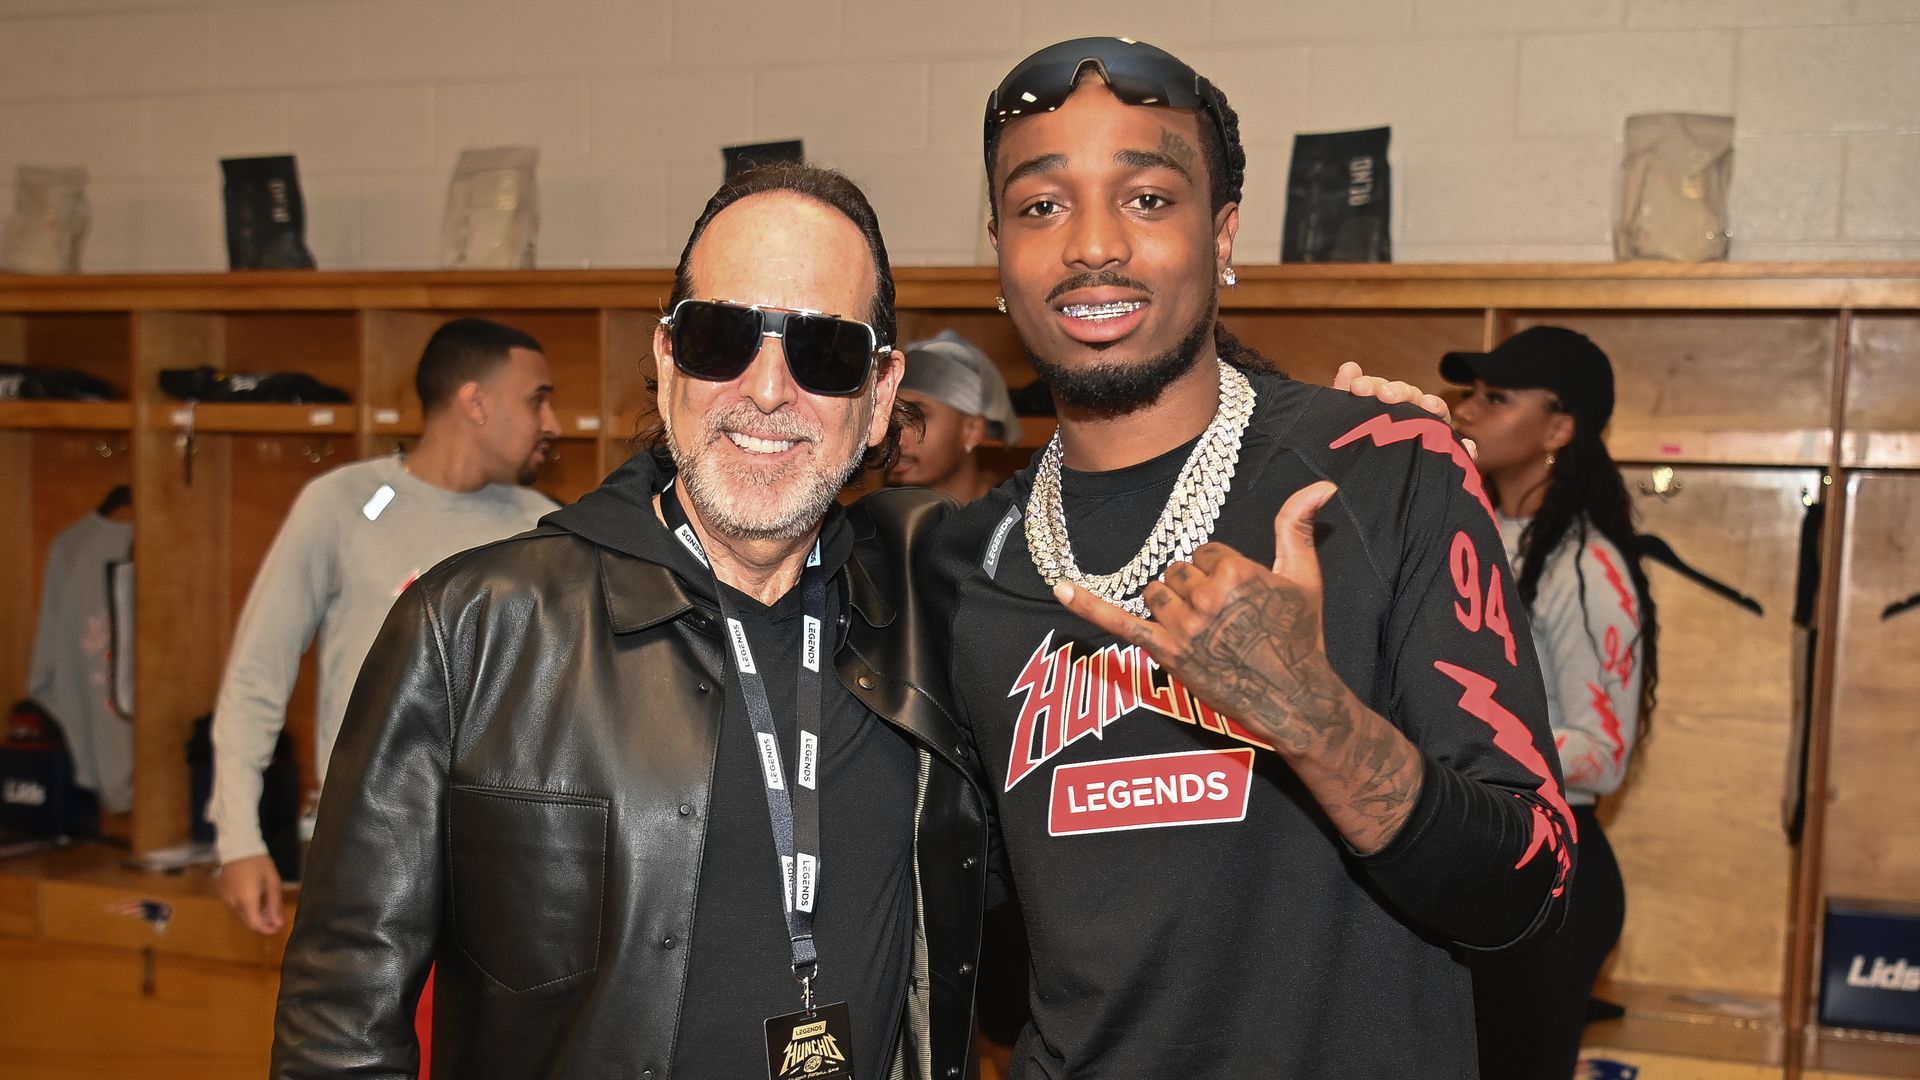 A man wearing dark sunglasses and all black clothing poses with another man in a locker room